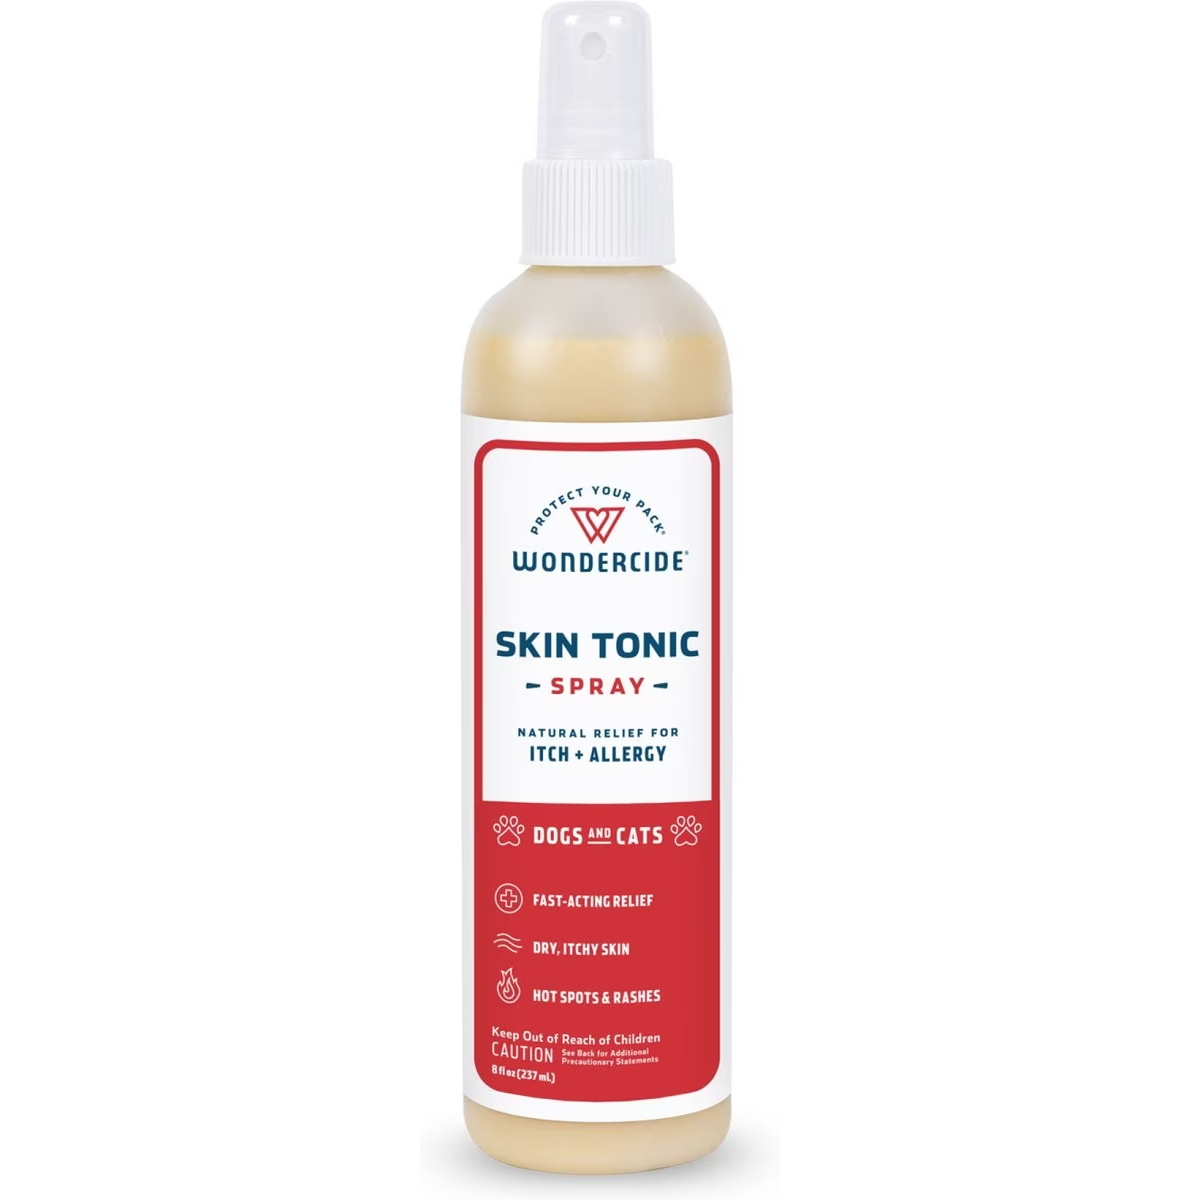 Wondercide Skin Tonic Itch + Allergy Relief Dog & Cat Spray